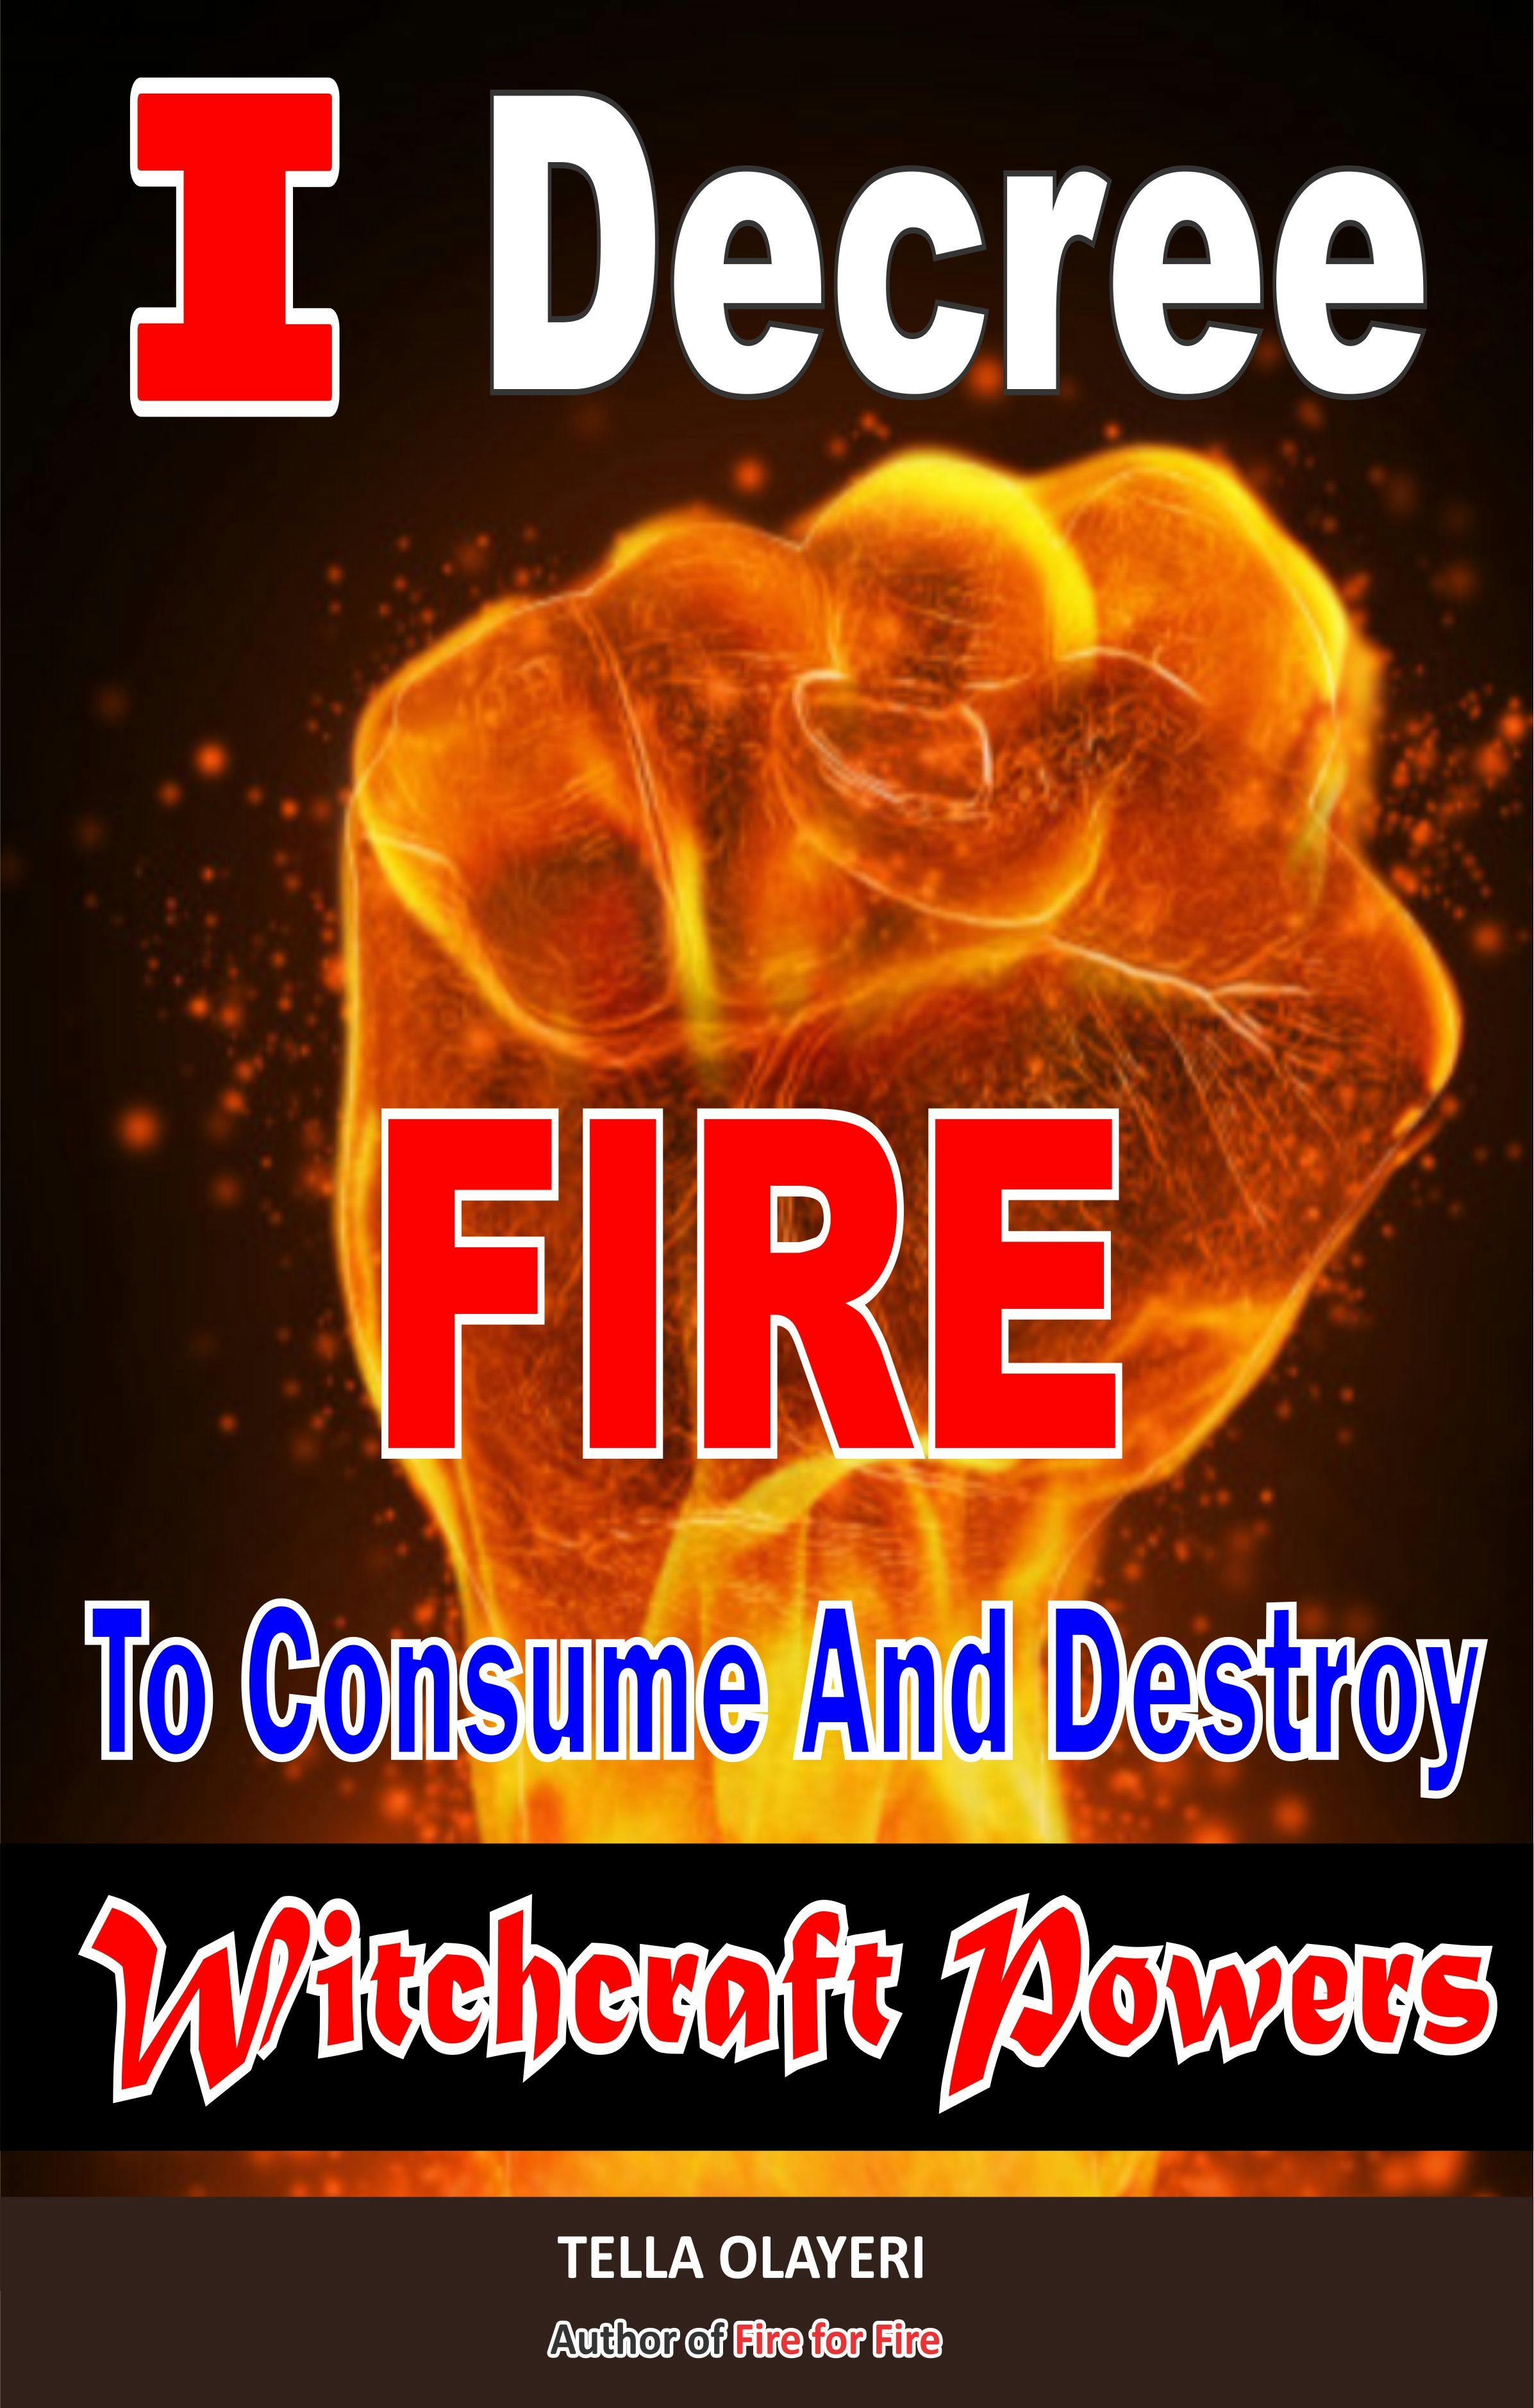 I Decree Fire To Consume And Destroy Witchcraft Powers - undefined